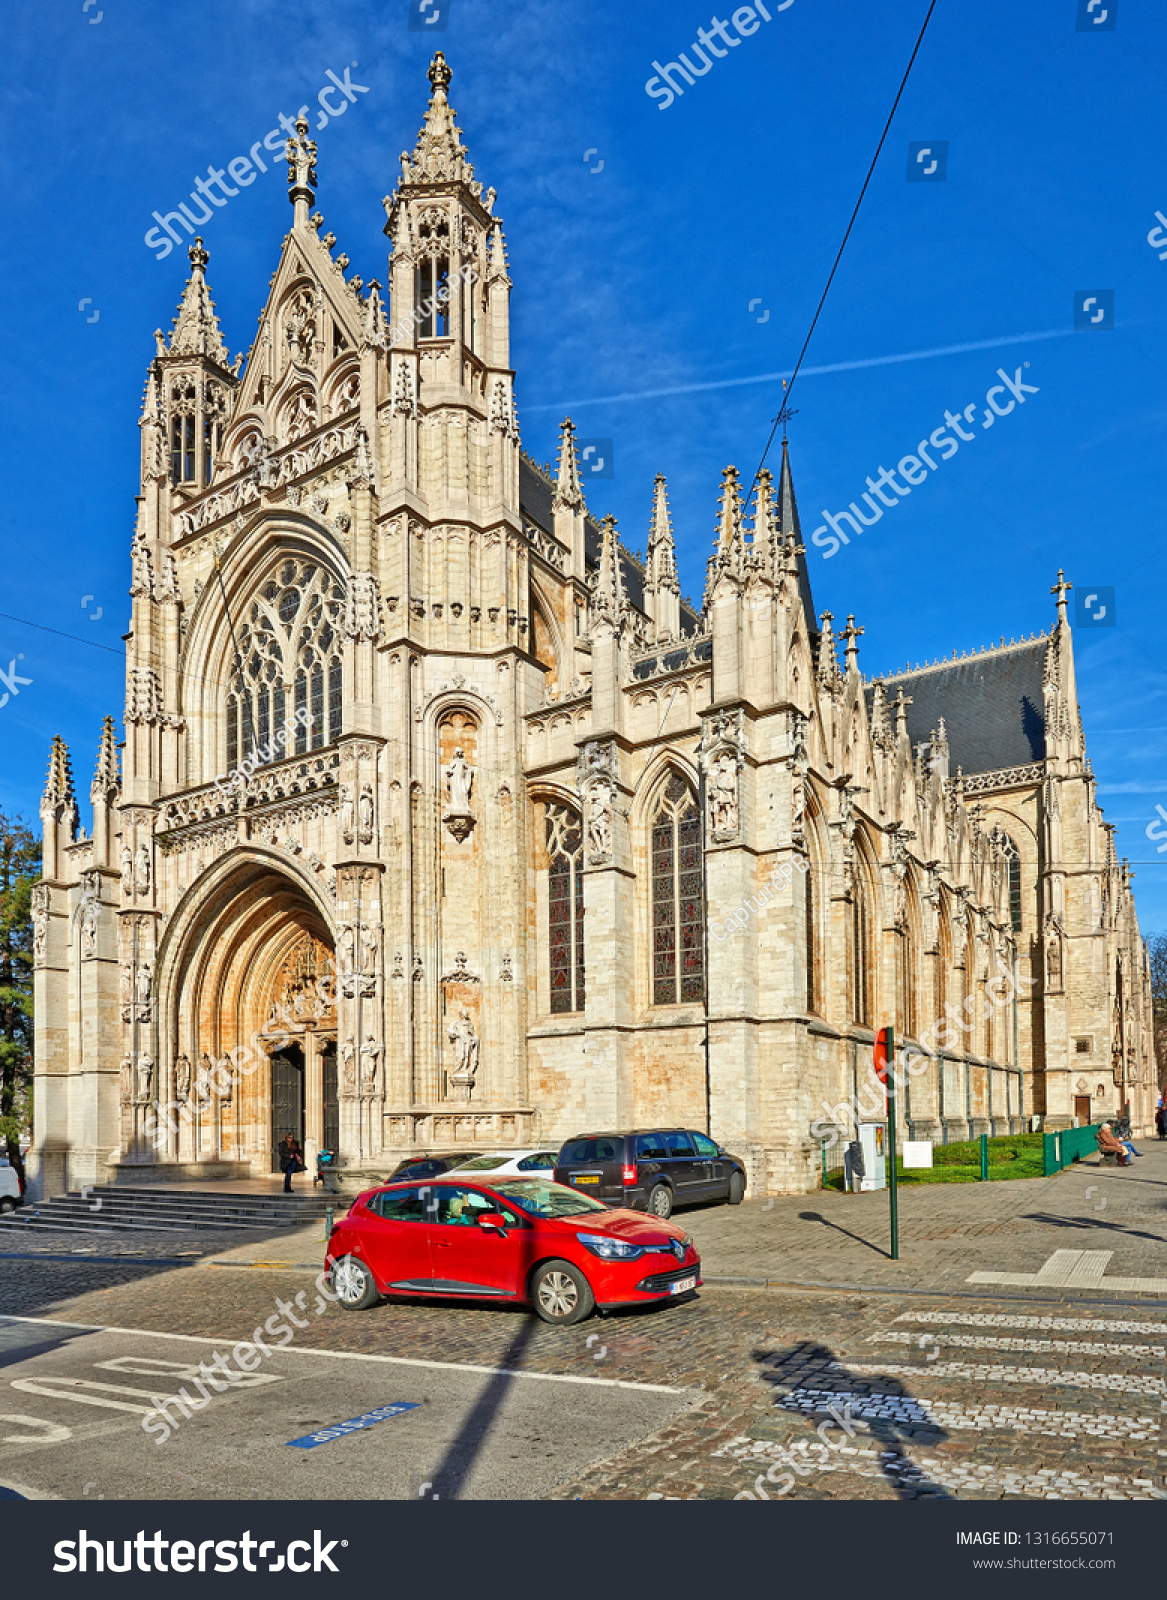 BRUSSELS, BELGIUM - FEBRUARY 17, 2019: Some people enjoy a Sunny winter day at Notre Dame du Sablon's Cathedral in Brussels, Belgium 2019 #1316655071